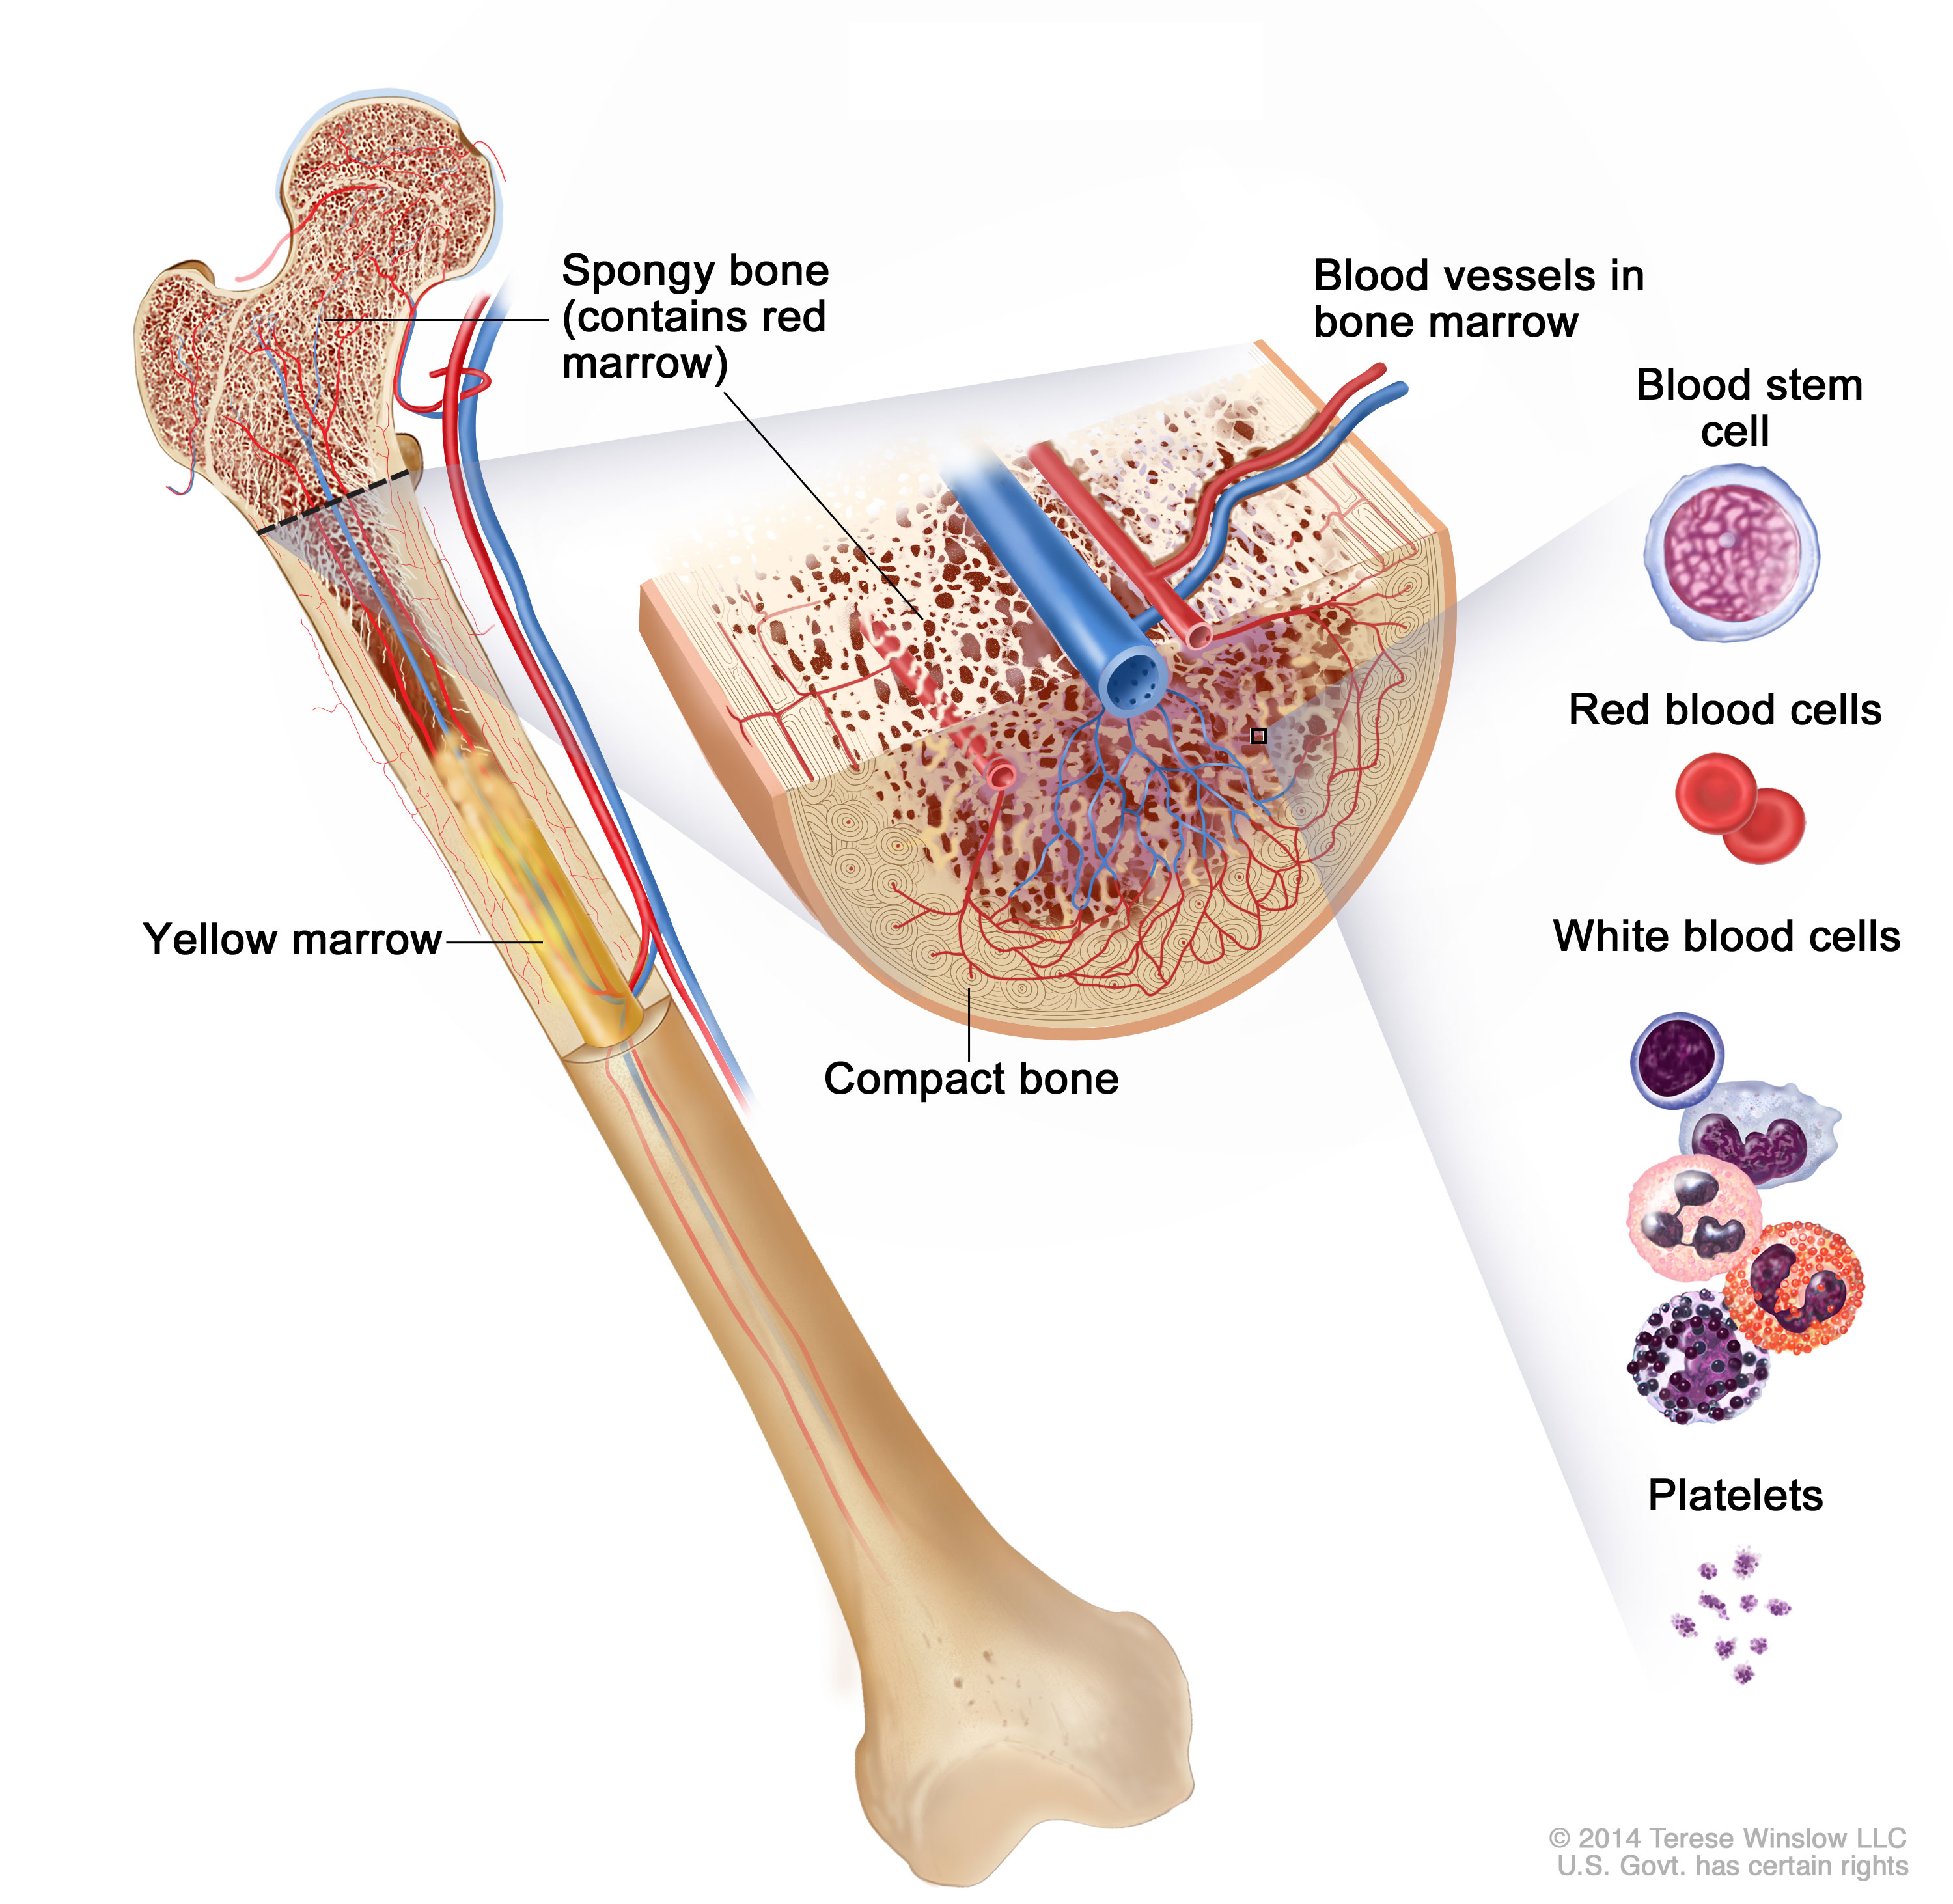 bone marrow cancer research articles